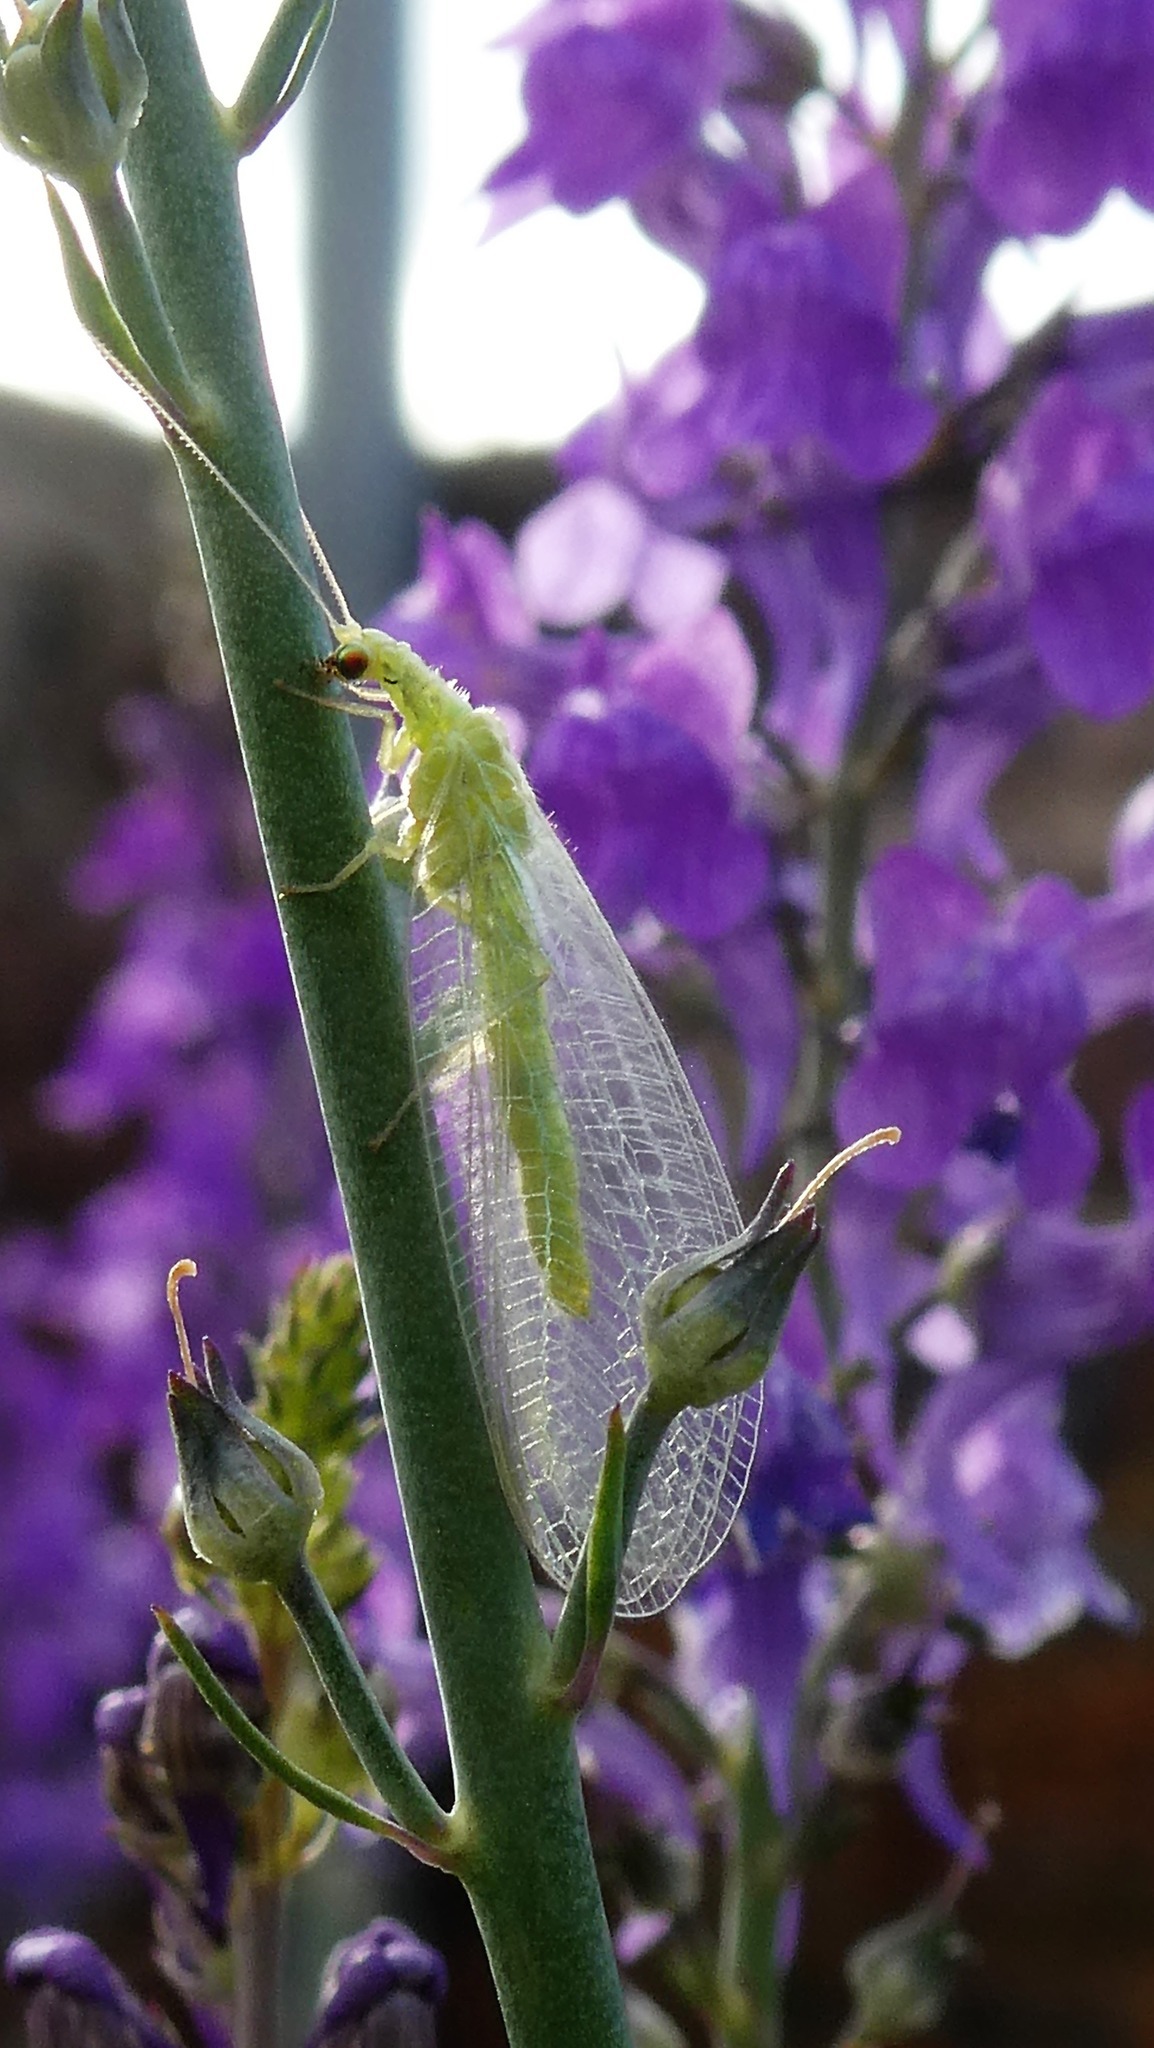 Lacewing on toadflax by Lynne Bentley